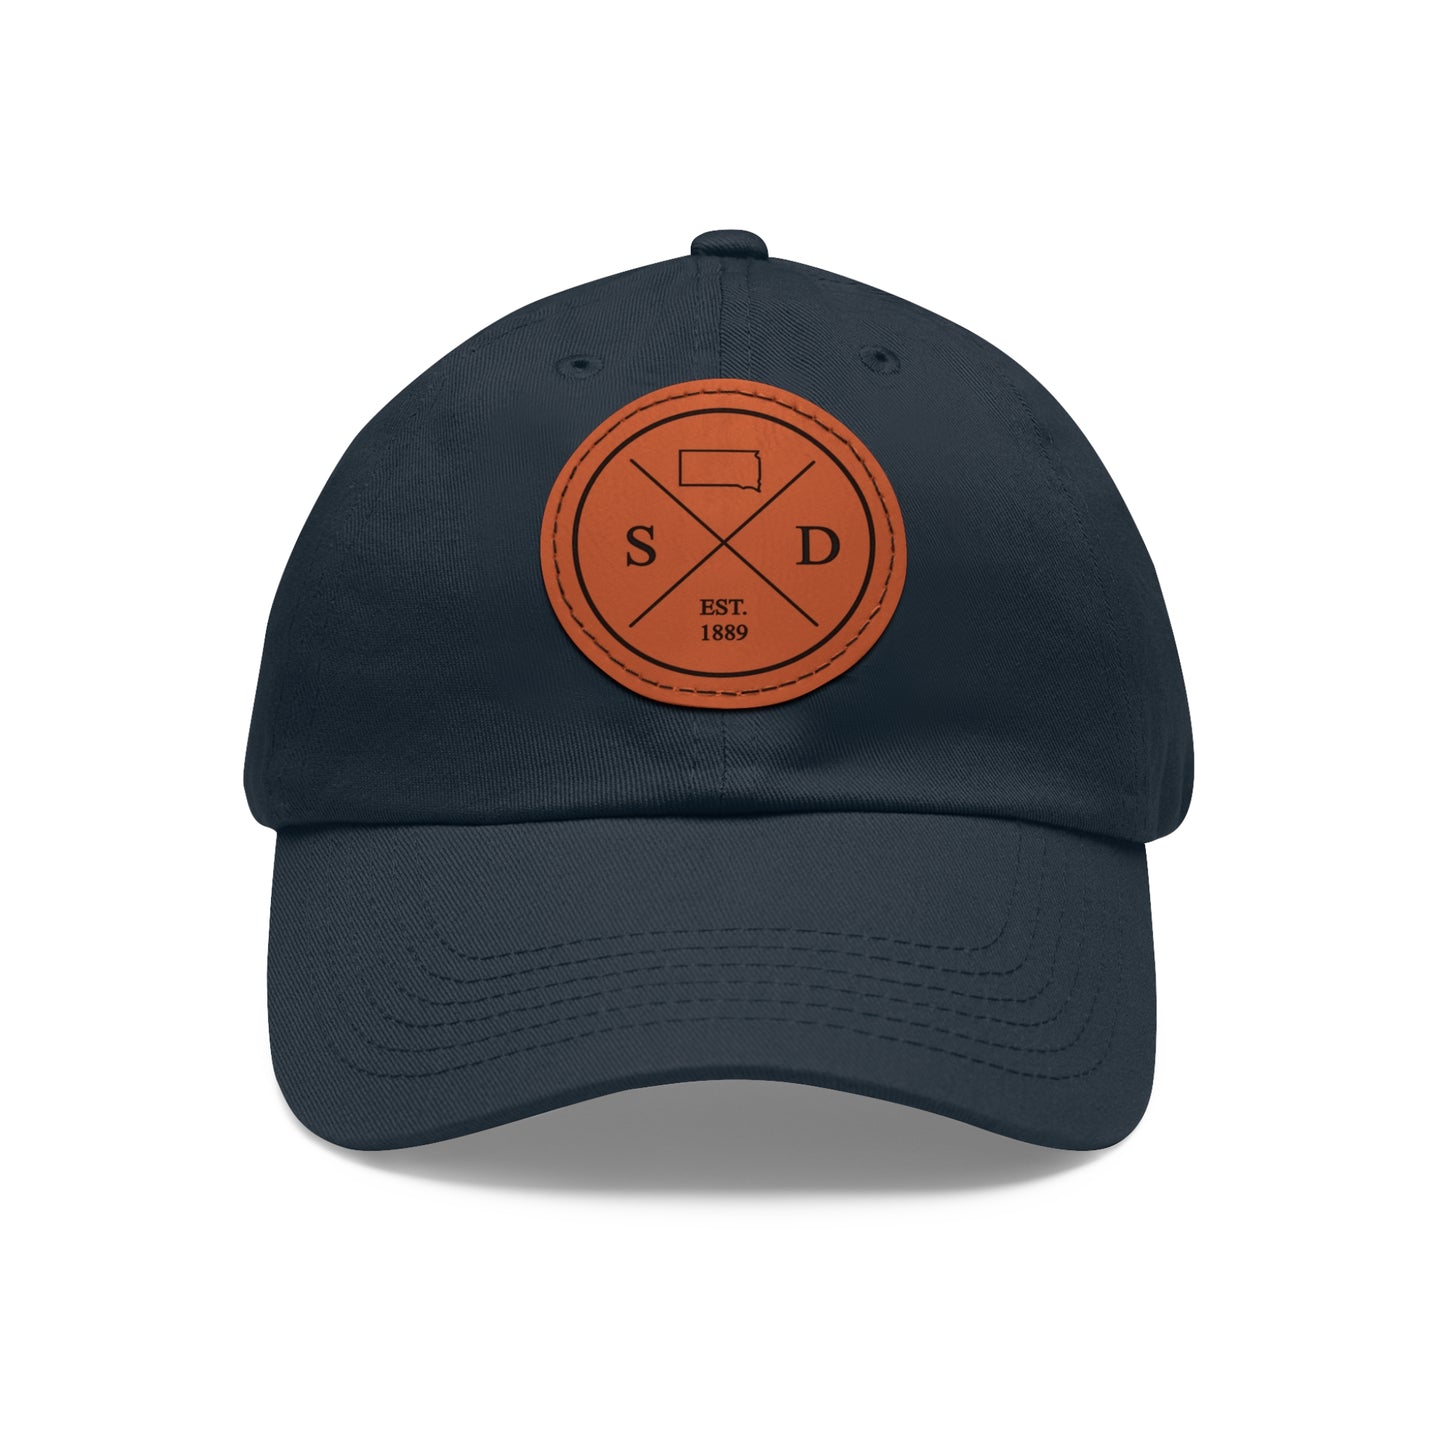 South Dakota Dad Hat with Leather Patch